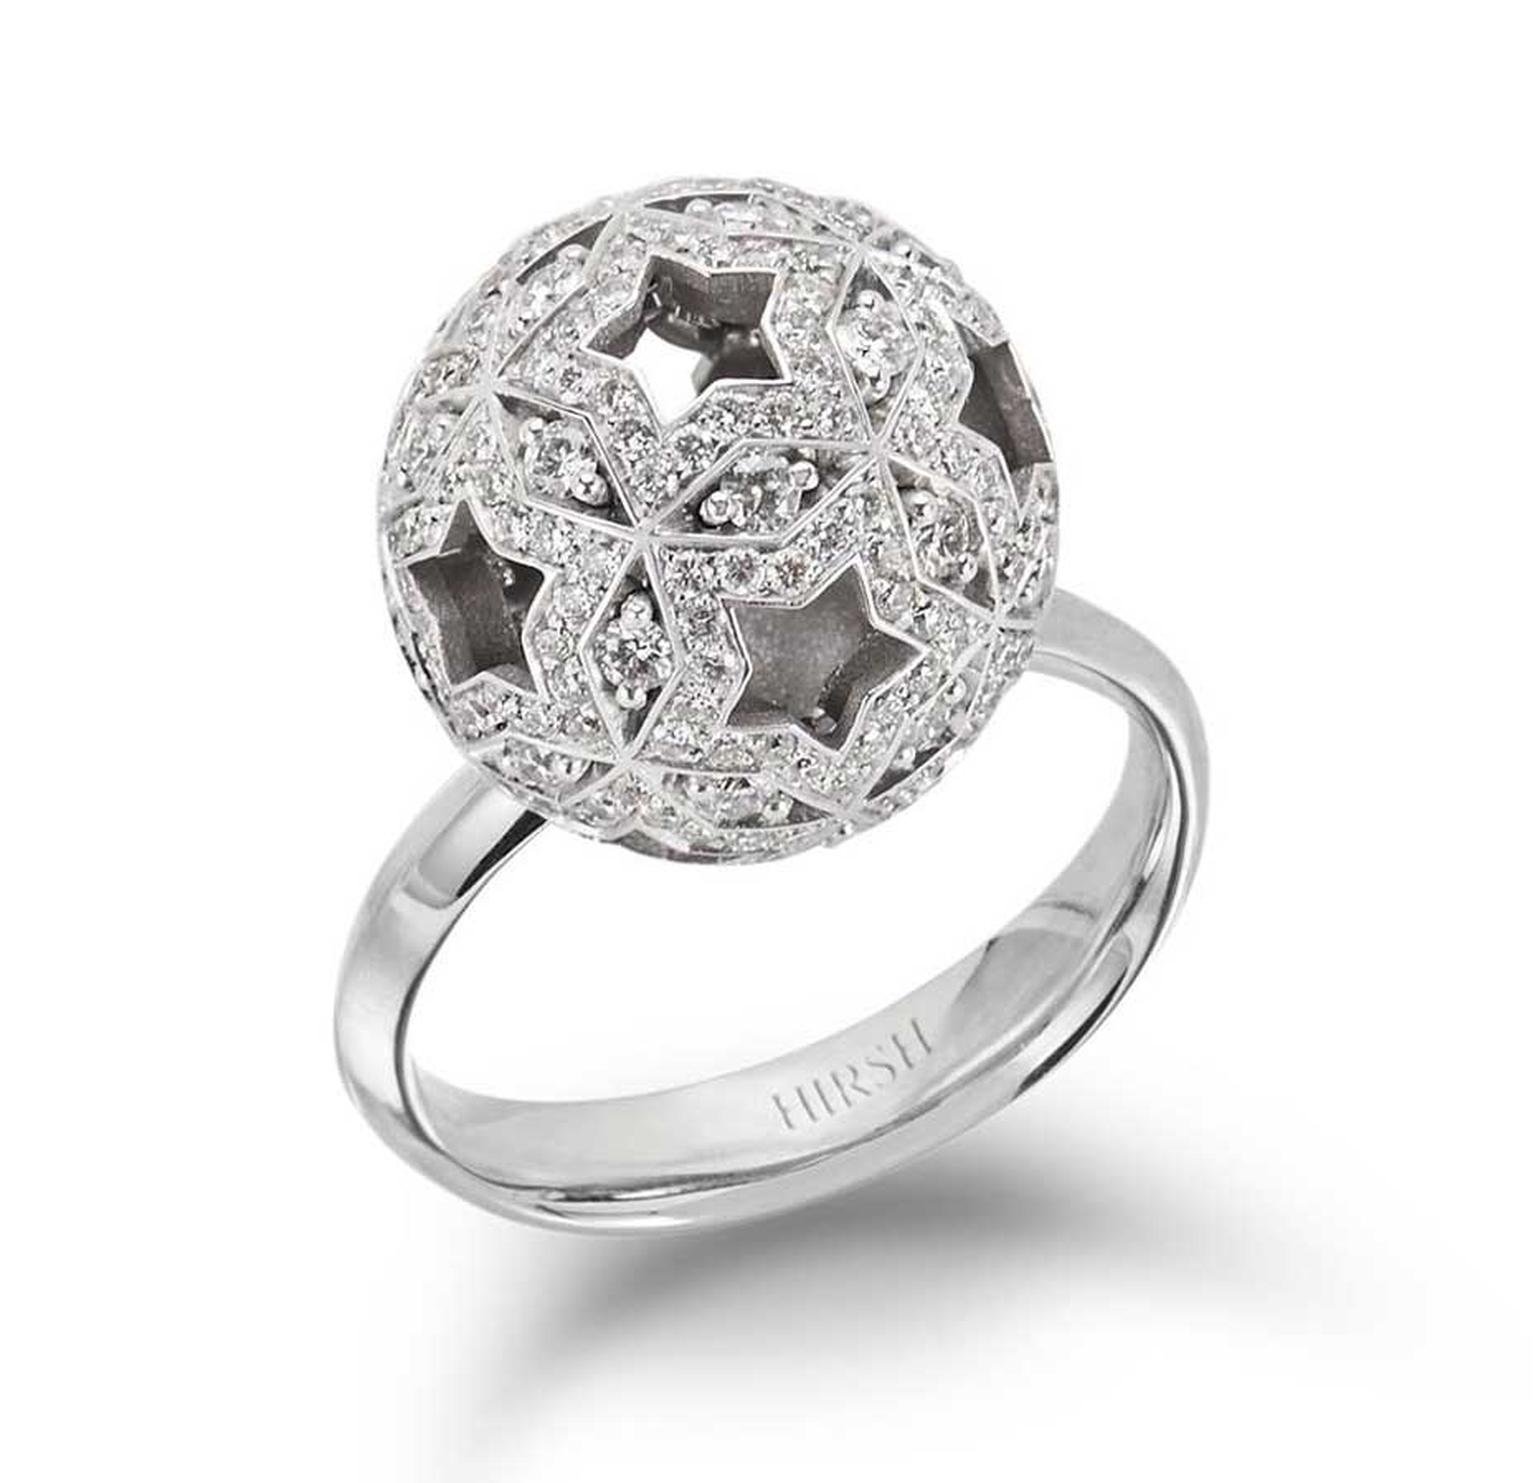 Hirsh Orion white gold and diamond ring, from the new Celestial collection.